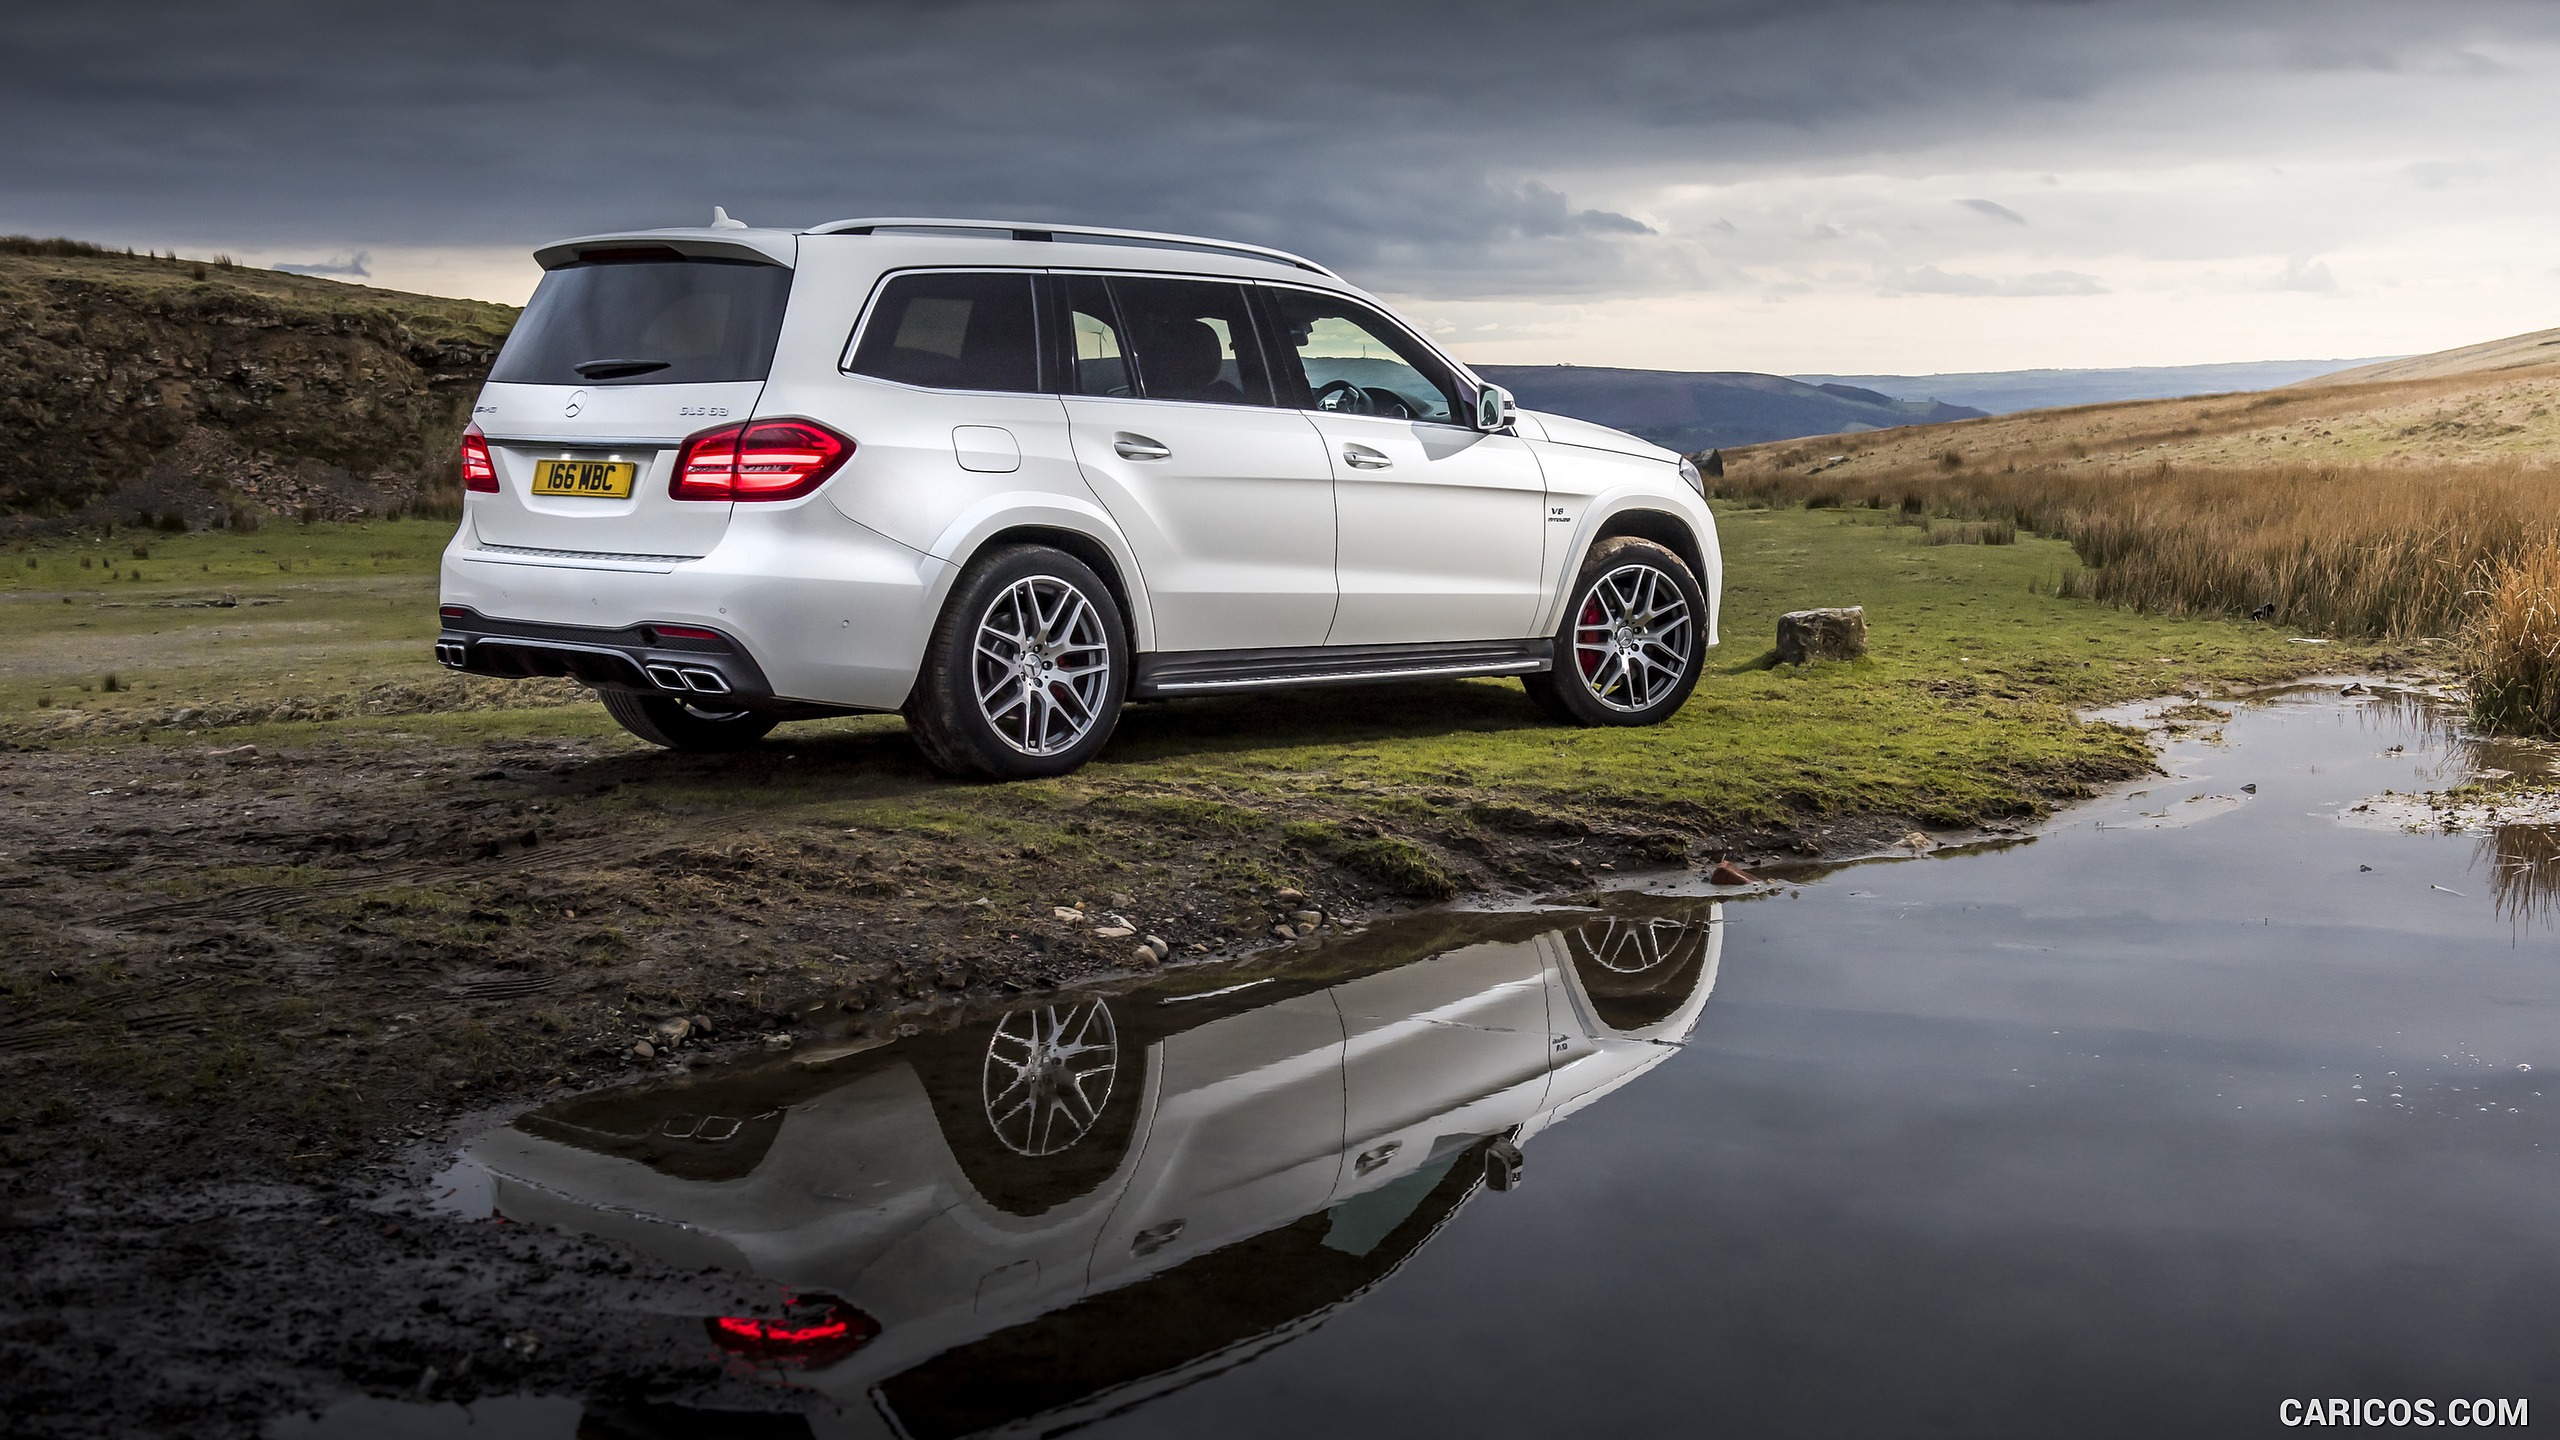 Mercedes Benz Gls Wallpapers Rev Up Your Screens With Stunning Car